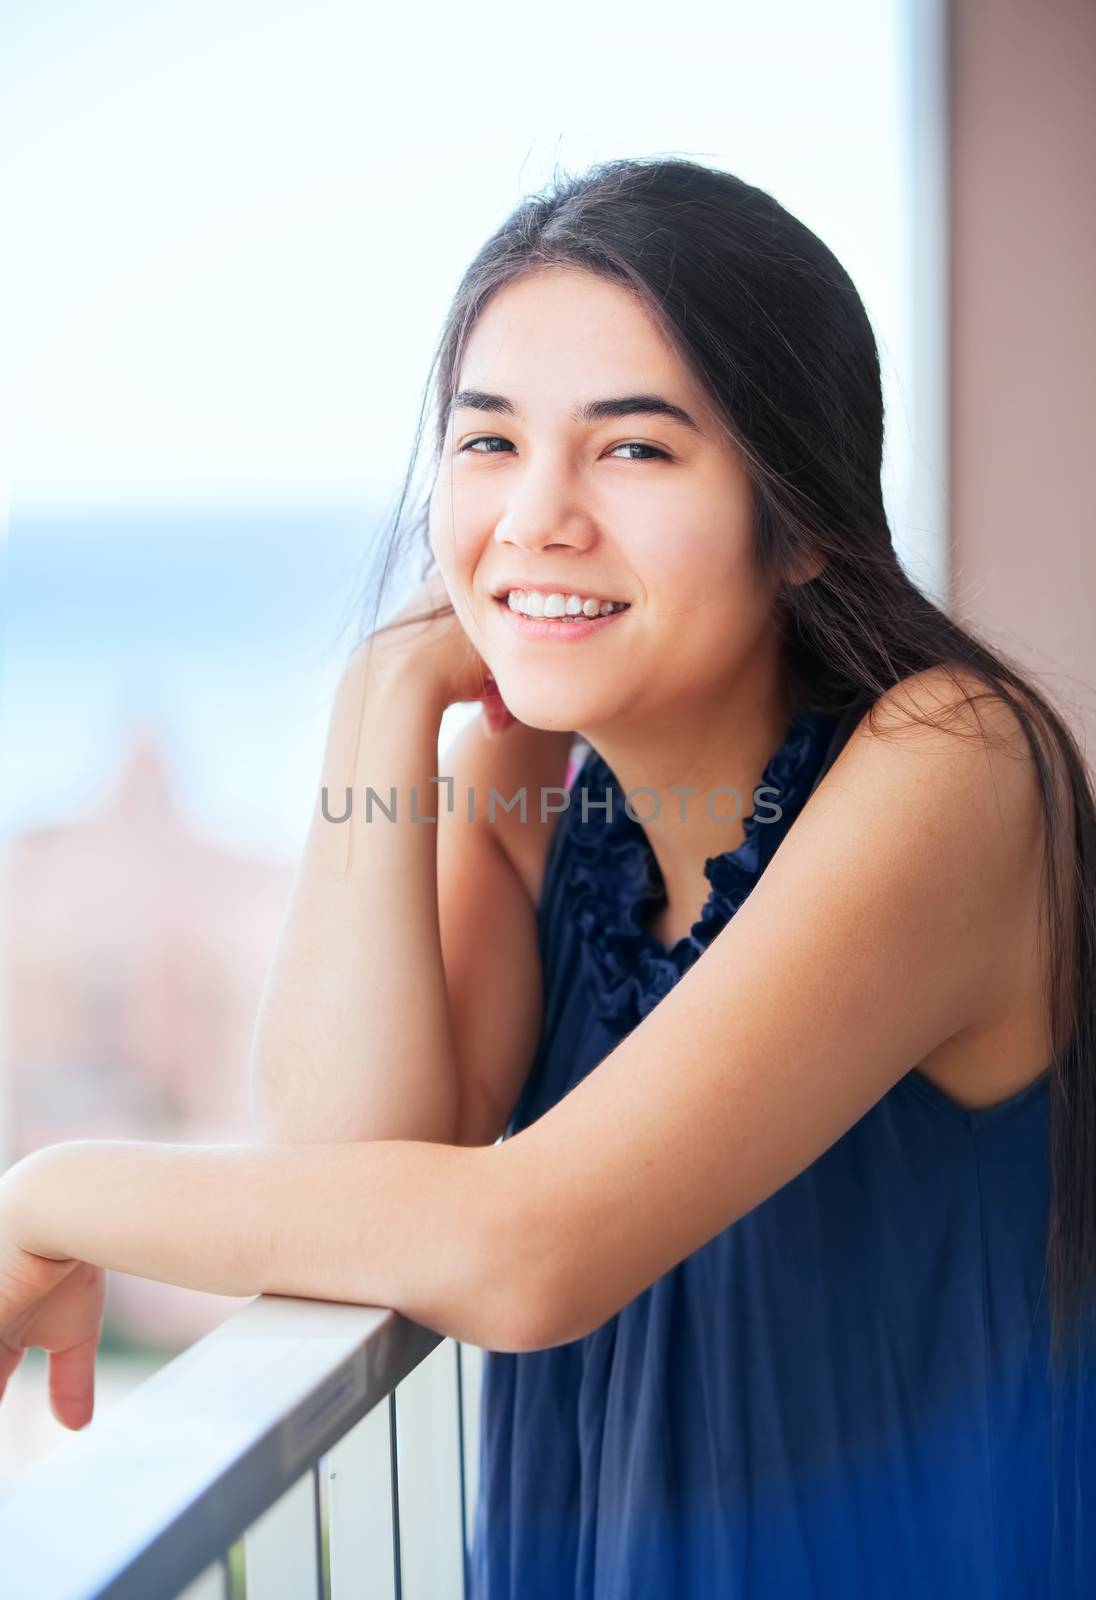 Beautiful biracial Asian Caucasian teen girl standing on outdoor high rise patio deck, leaning on railing with ocean landscape in background